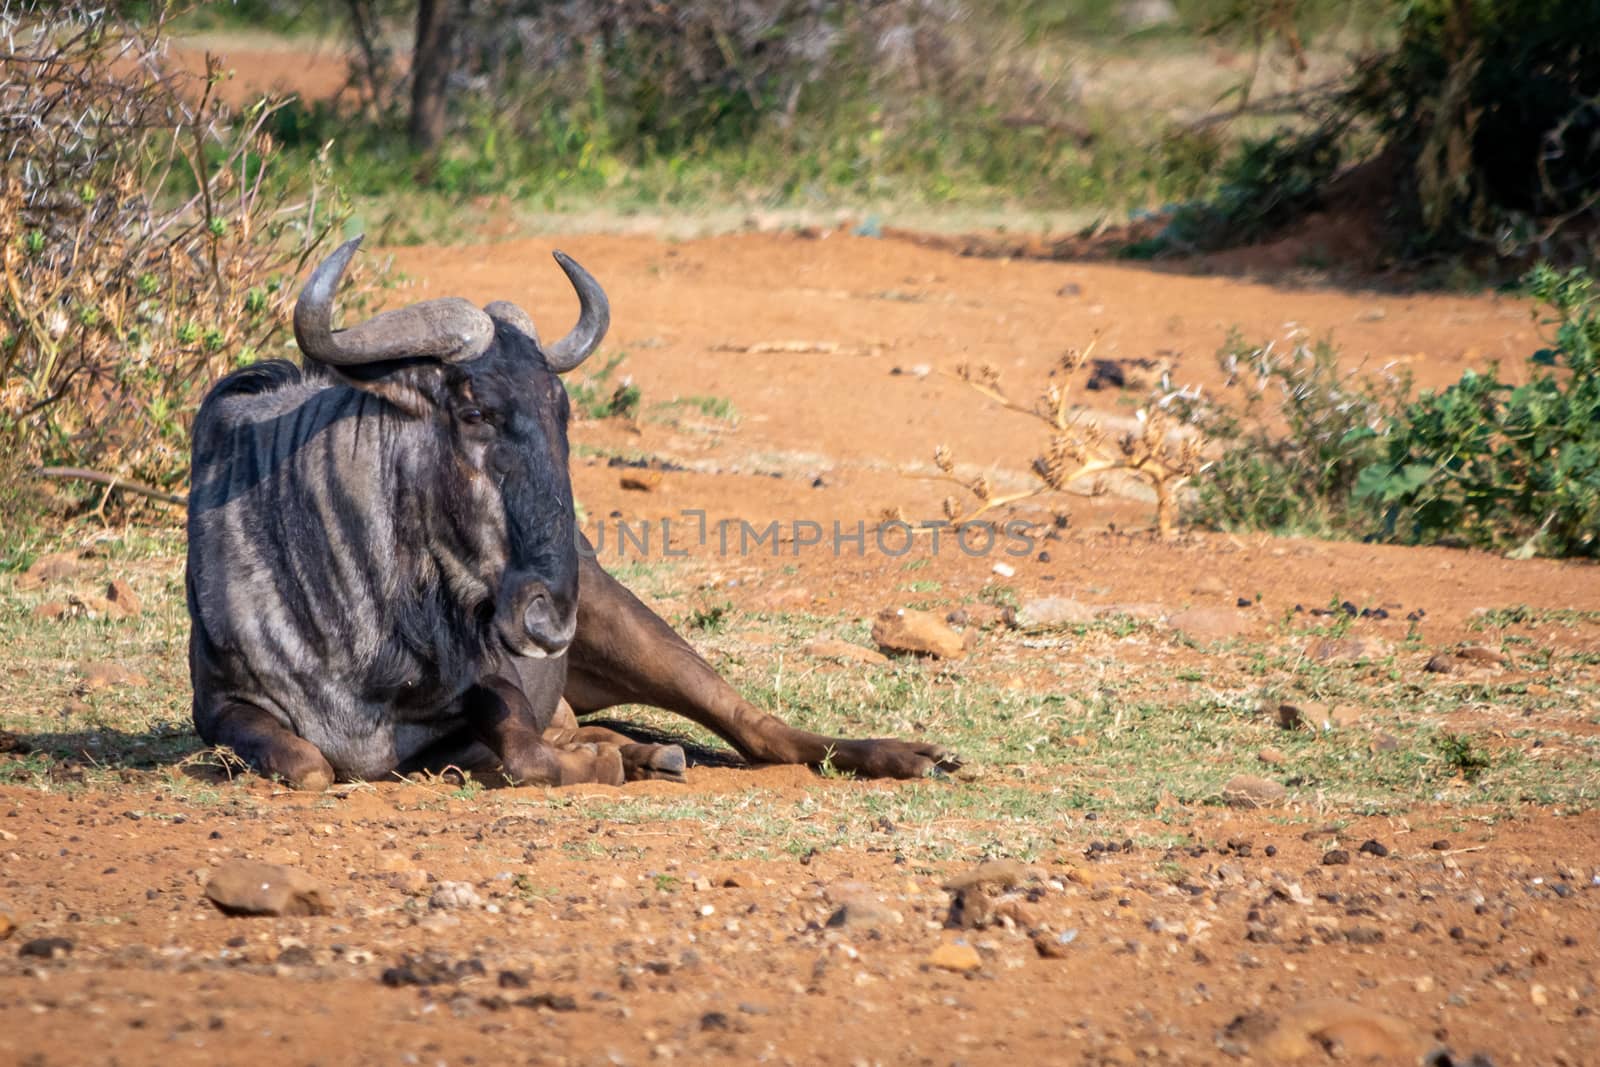 Blue wildebeest lying on in the grass and sand of African savannah during a safari trip. Animal wildlife.